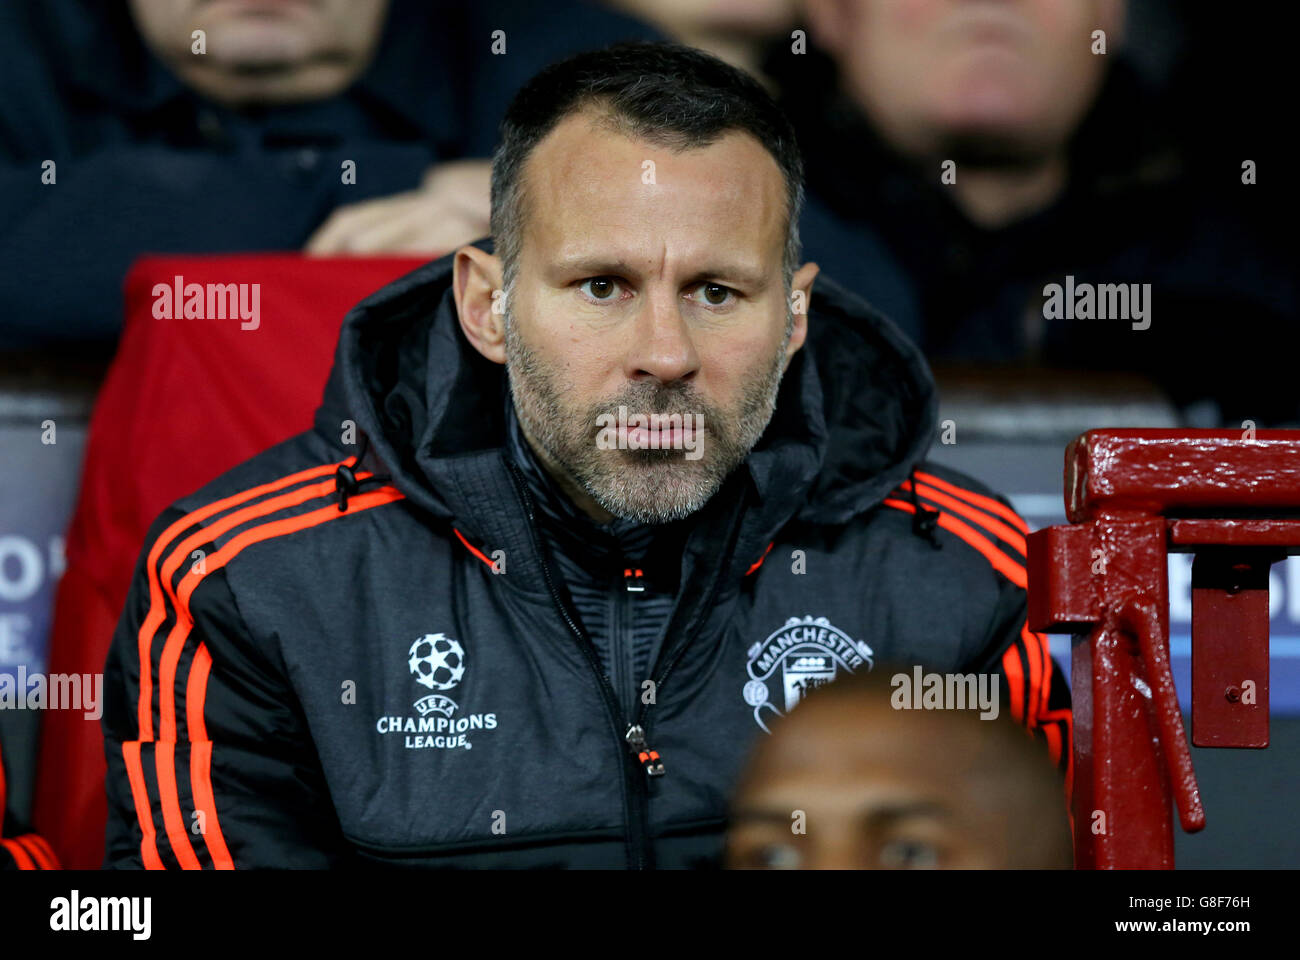 Manchester United v PSV Eindhoven - UEFA Champions League - Group B - Old Trafford. Manchester United assistant manager Ryan Giggs Stock Photo